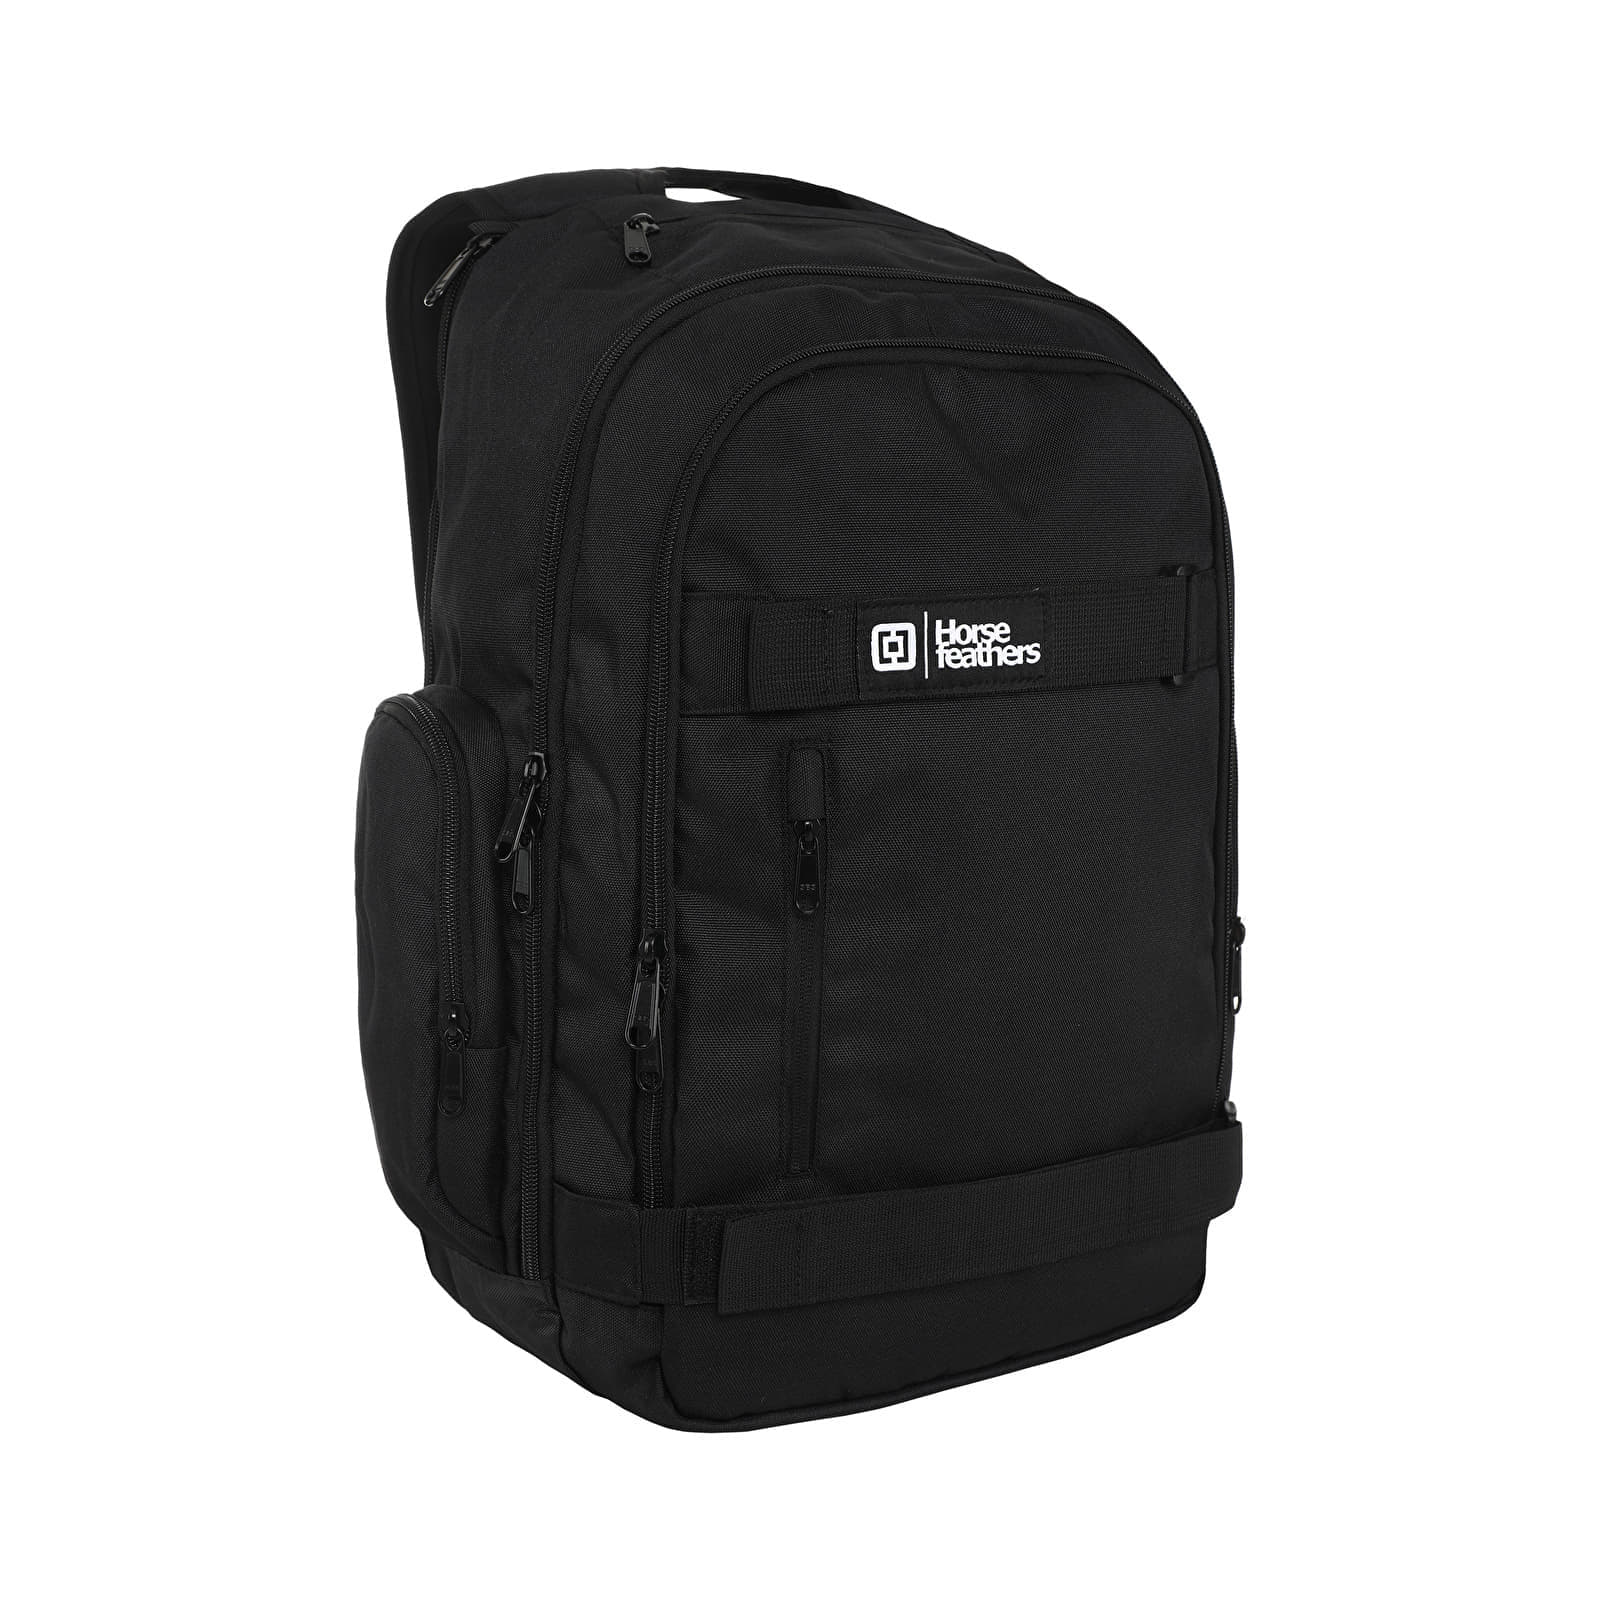 Horsefeathers Bolter Pack Black